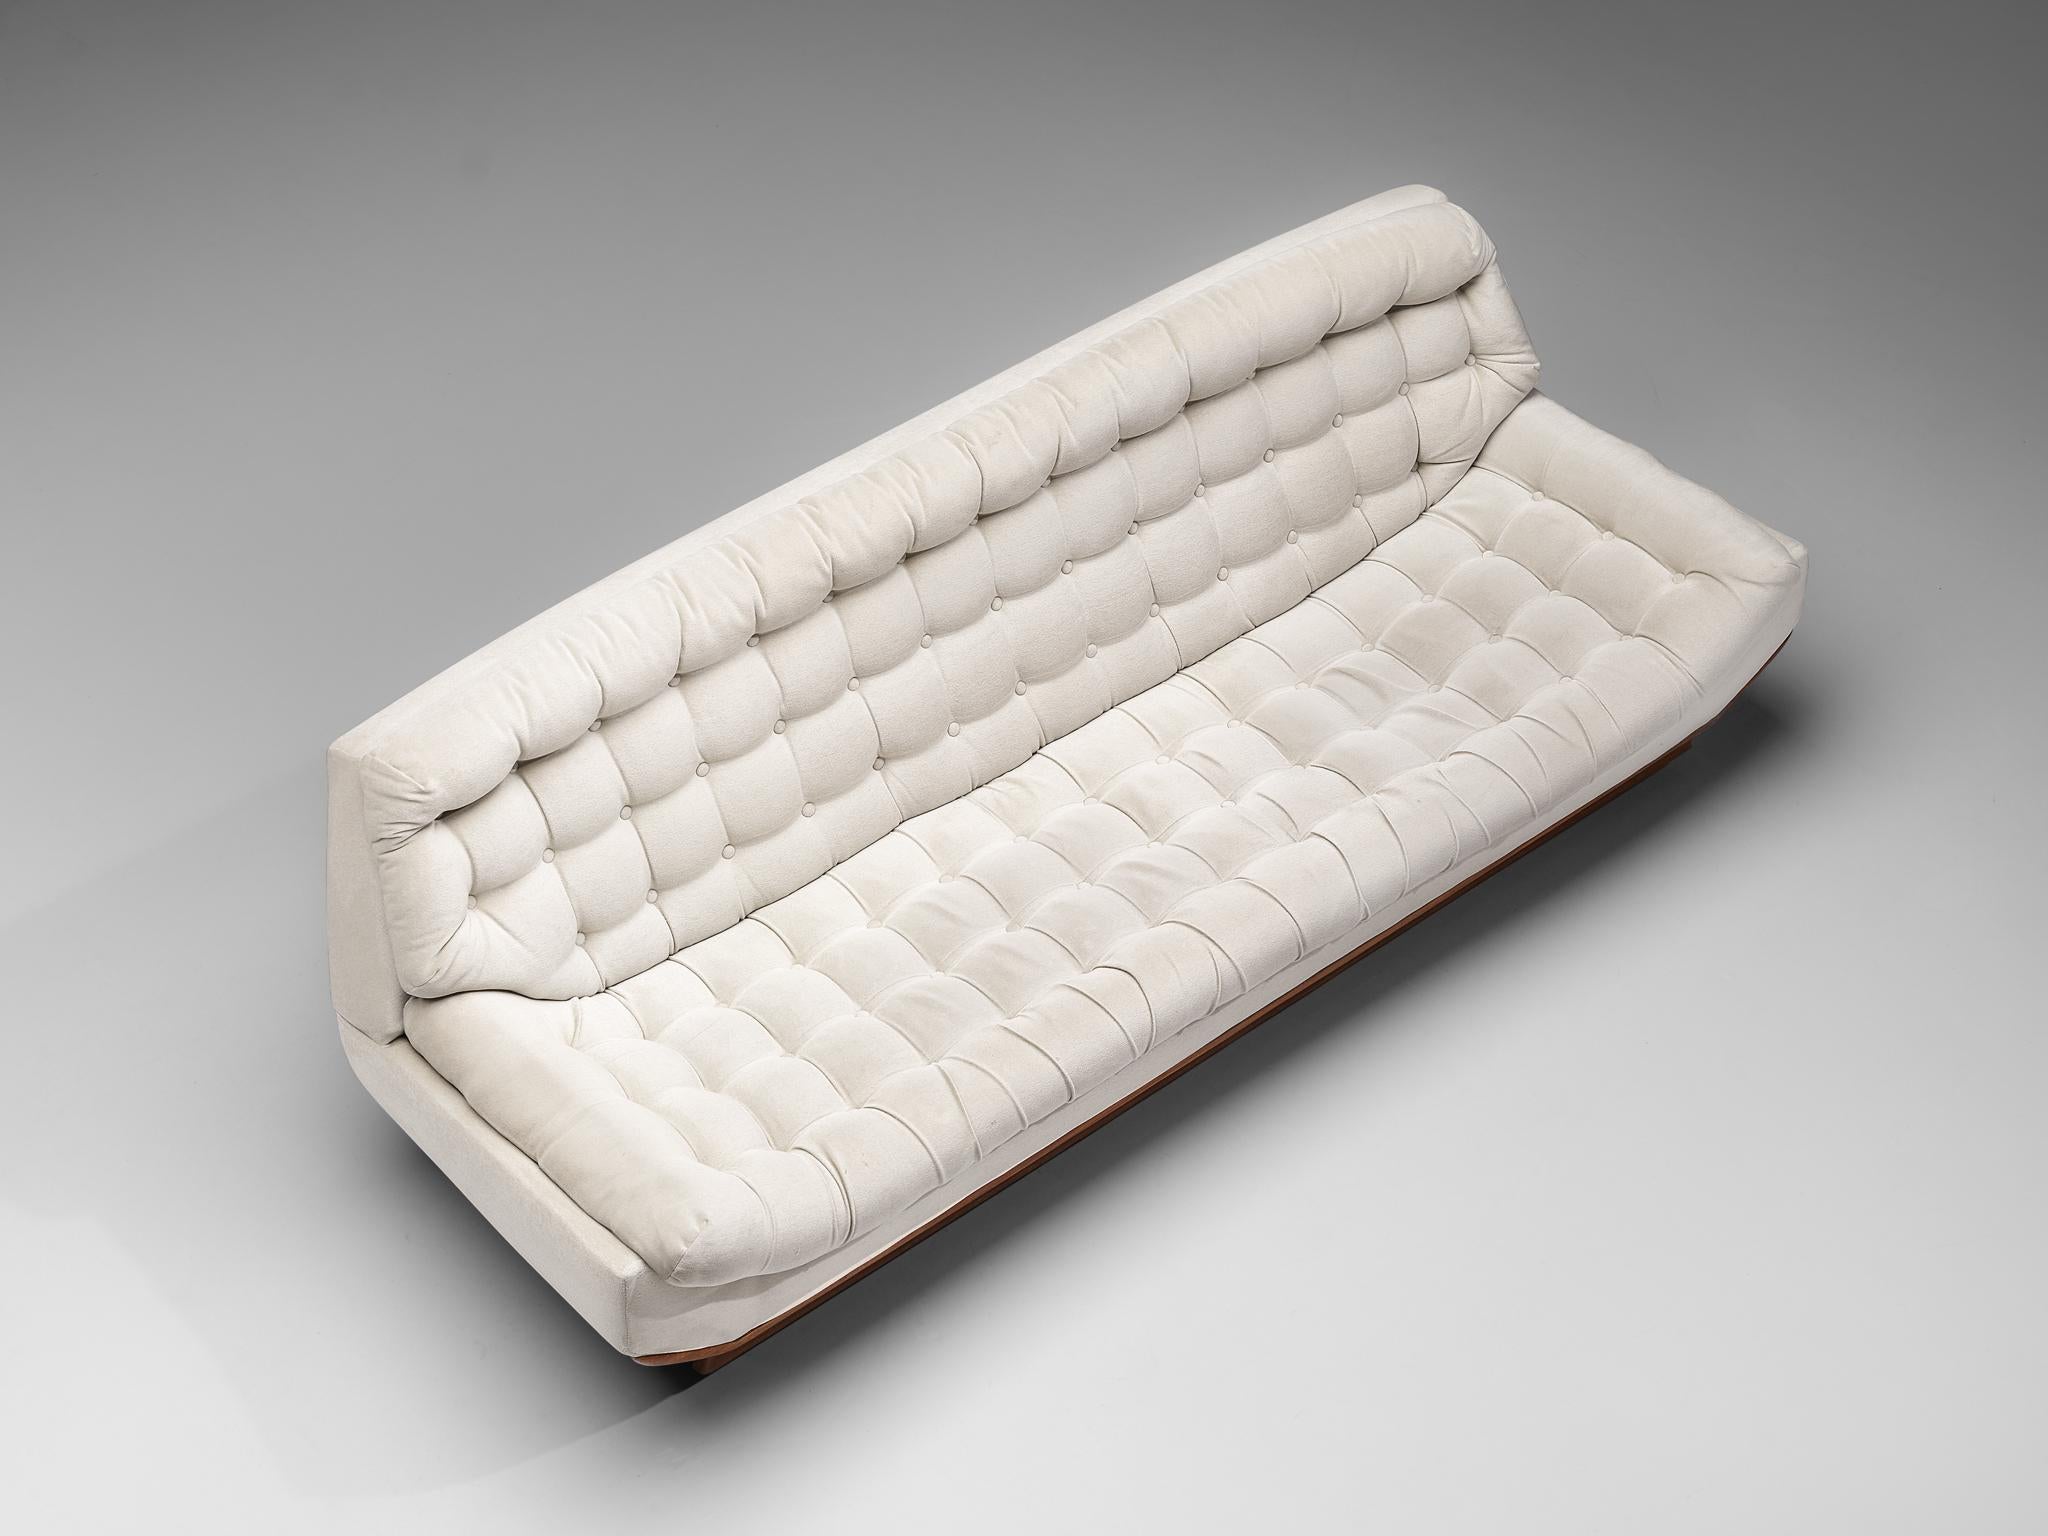 Mid-Century Modern Italian Sofa with White Tufted Upholstery